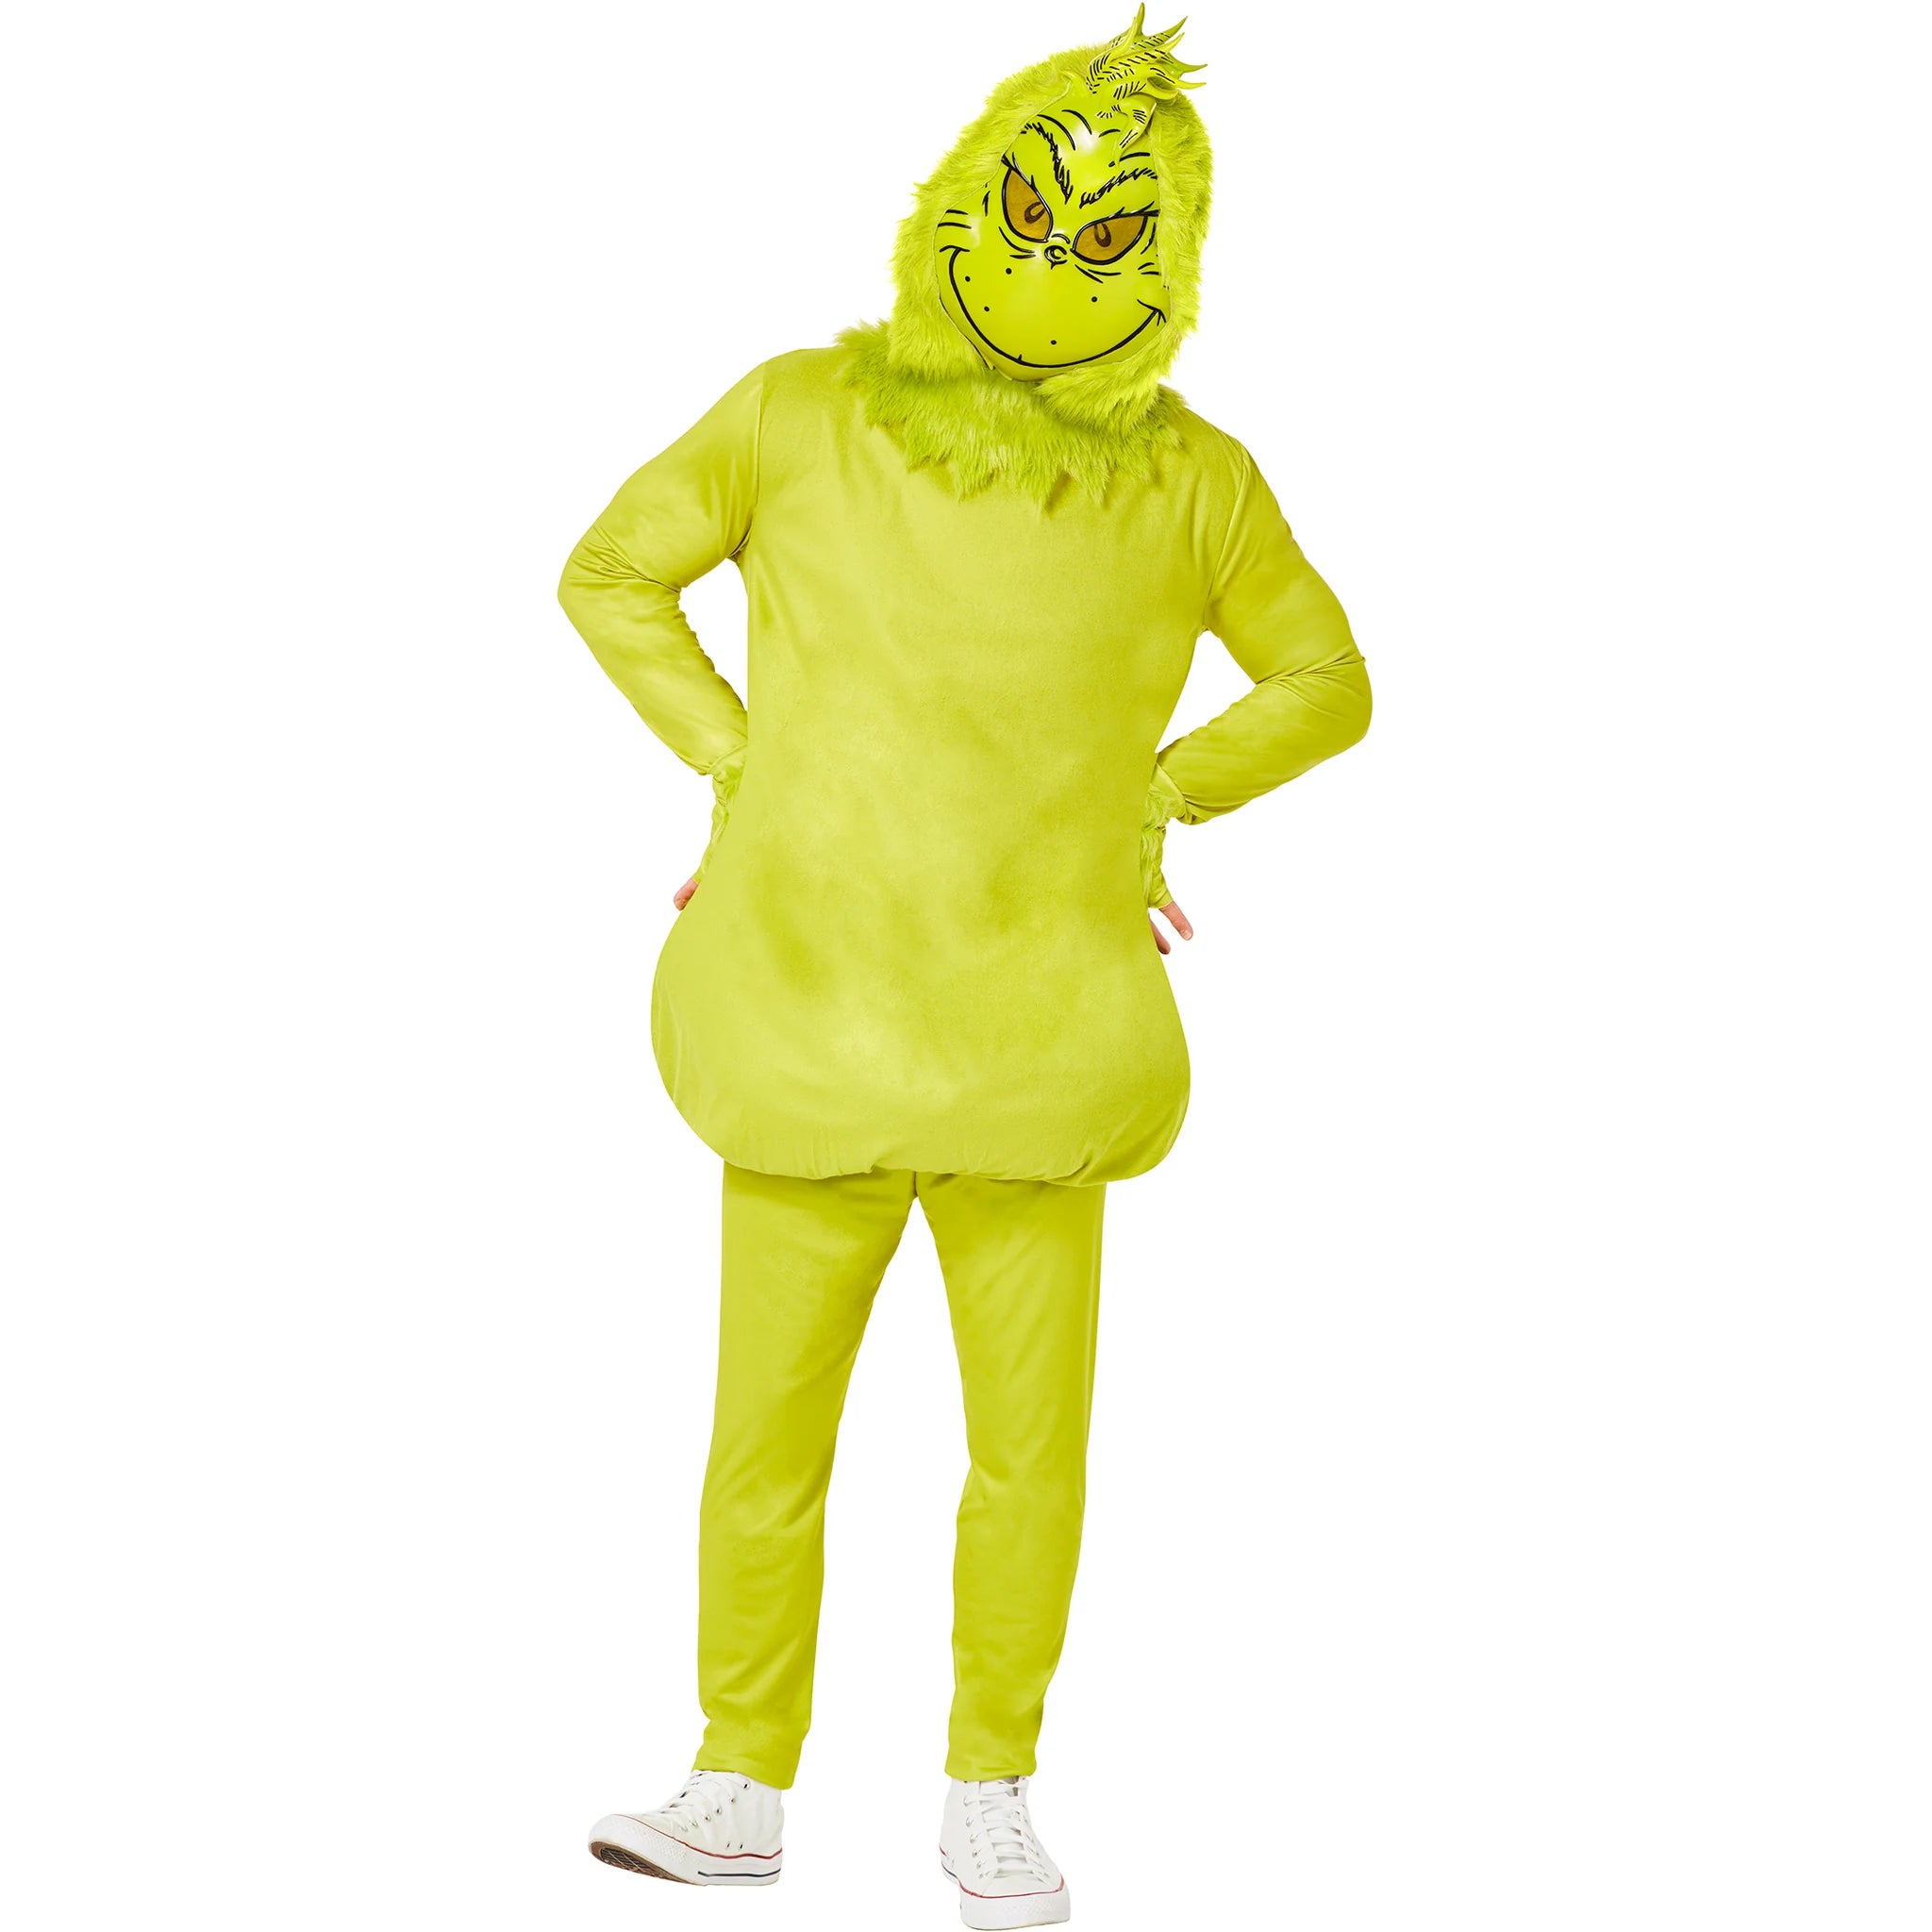 Dr. Suess The Grinch Costume